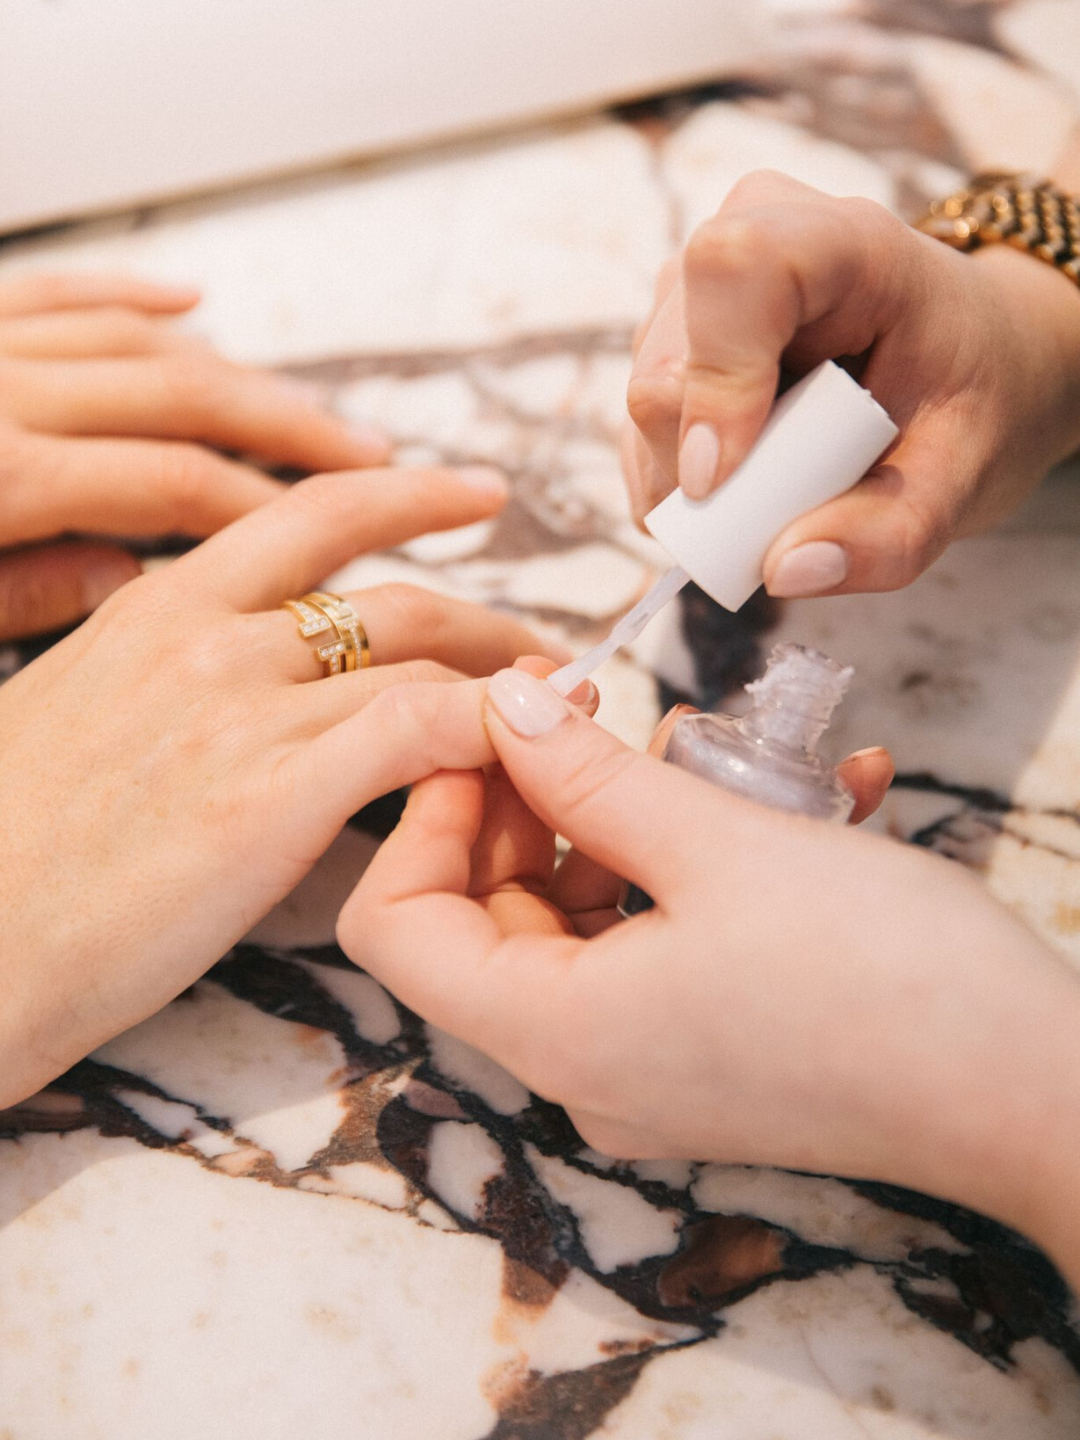 BIAB Nails Are the New, Longer-Lasting Alternative to Gel and